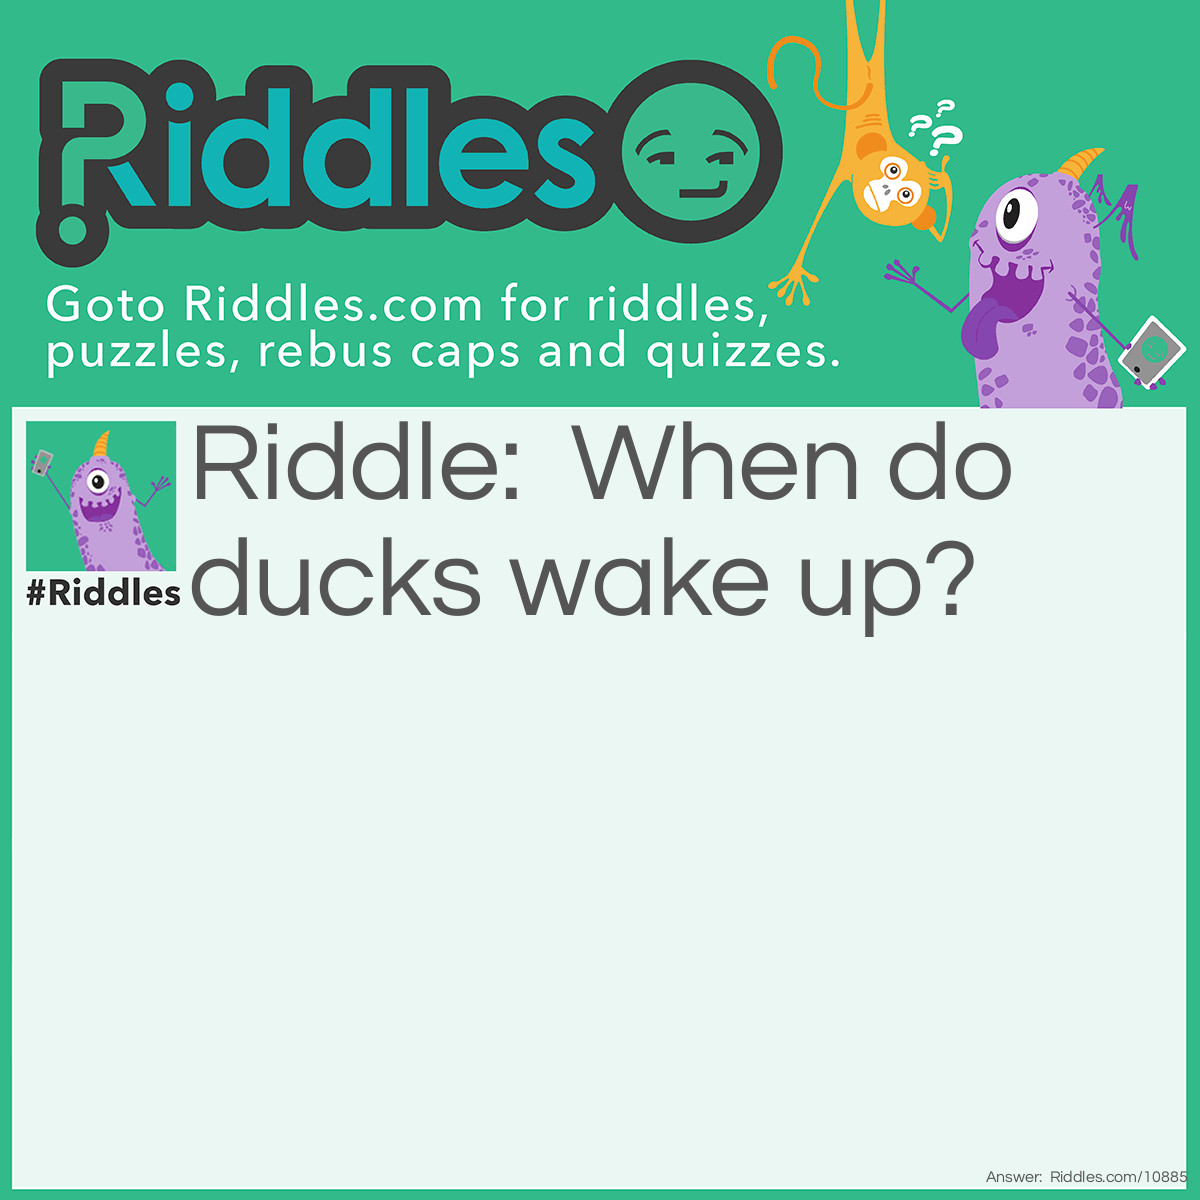 Riddle: When do ducks wake up? Answer: The quack of dawn.